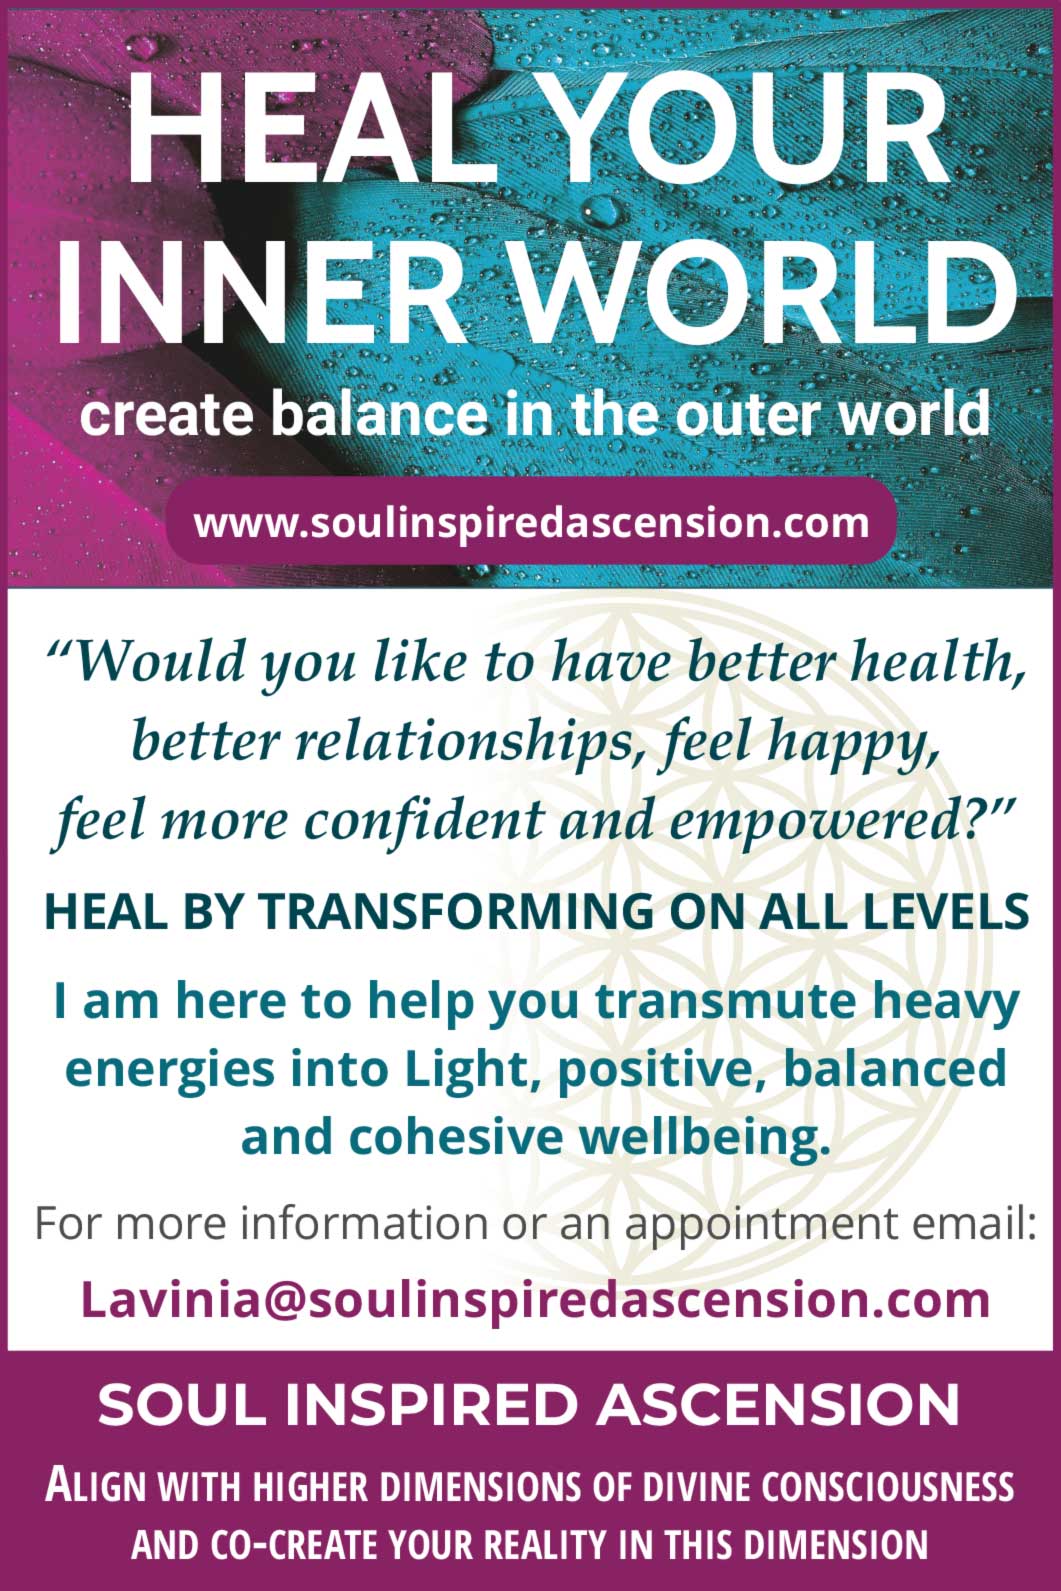 HEAL YOUR INNER WORLD create balance in the outer world www.soulinspiredascension.com  “Would you like to have better health, better relationships, feel happy, feel more confident and empowered?”  HEAL BY TRANSFORMING ON ALL LEVELS  I am here to help you transmute heavy energies into light, positive, balanced and cohesive wellbeing.  For more information or an appointment email: lavinia@soulinspiredascension.com  SOUL INSPIRED ASCENSION ALIGN WITH HIGHER DIMENSIONS OF DIVINE CONSCIOUSNESS AND CO-CREATE YOUR REALITY IN THIS DIMENSION